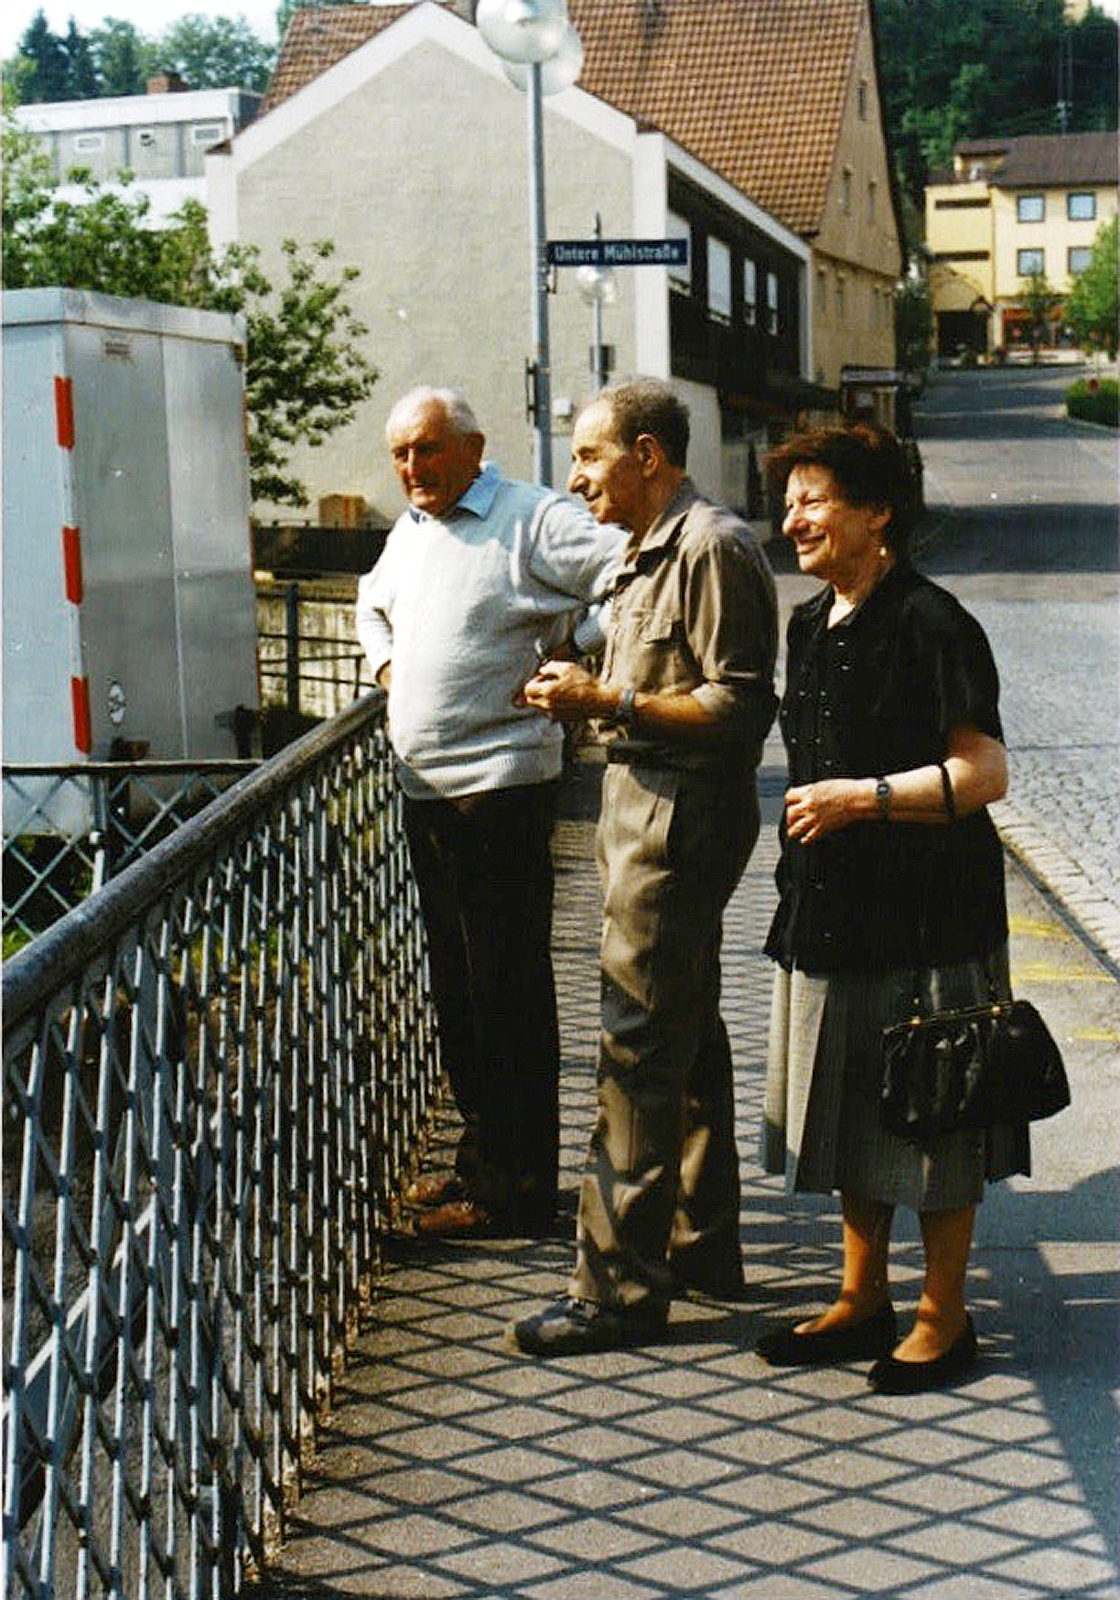 Manef (center) and Chanah Biran (right) in Hechingen, 1986.